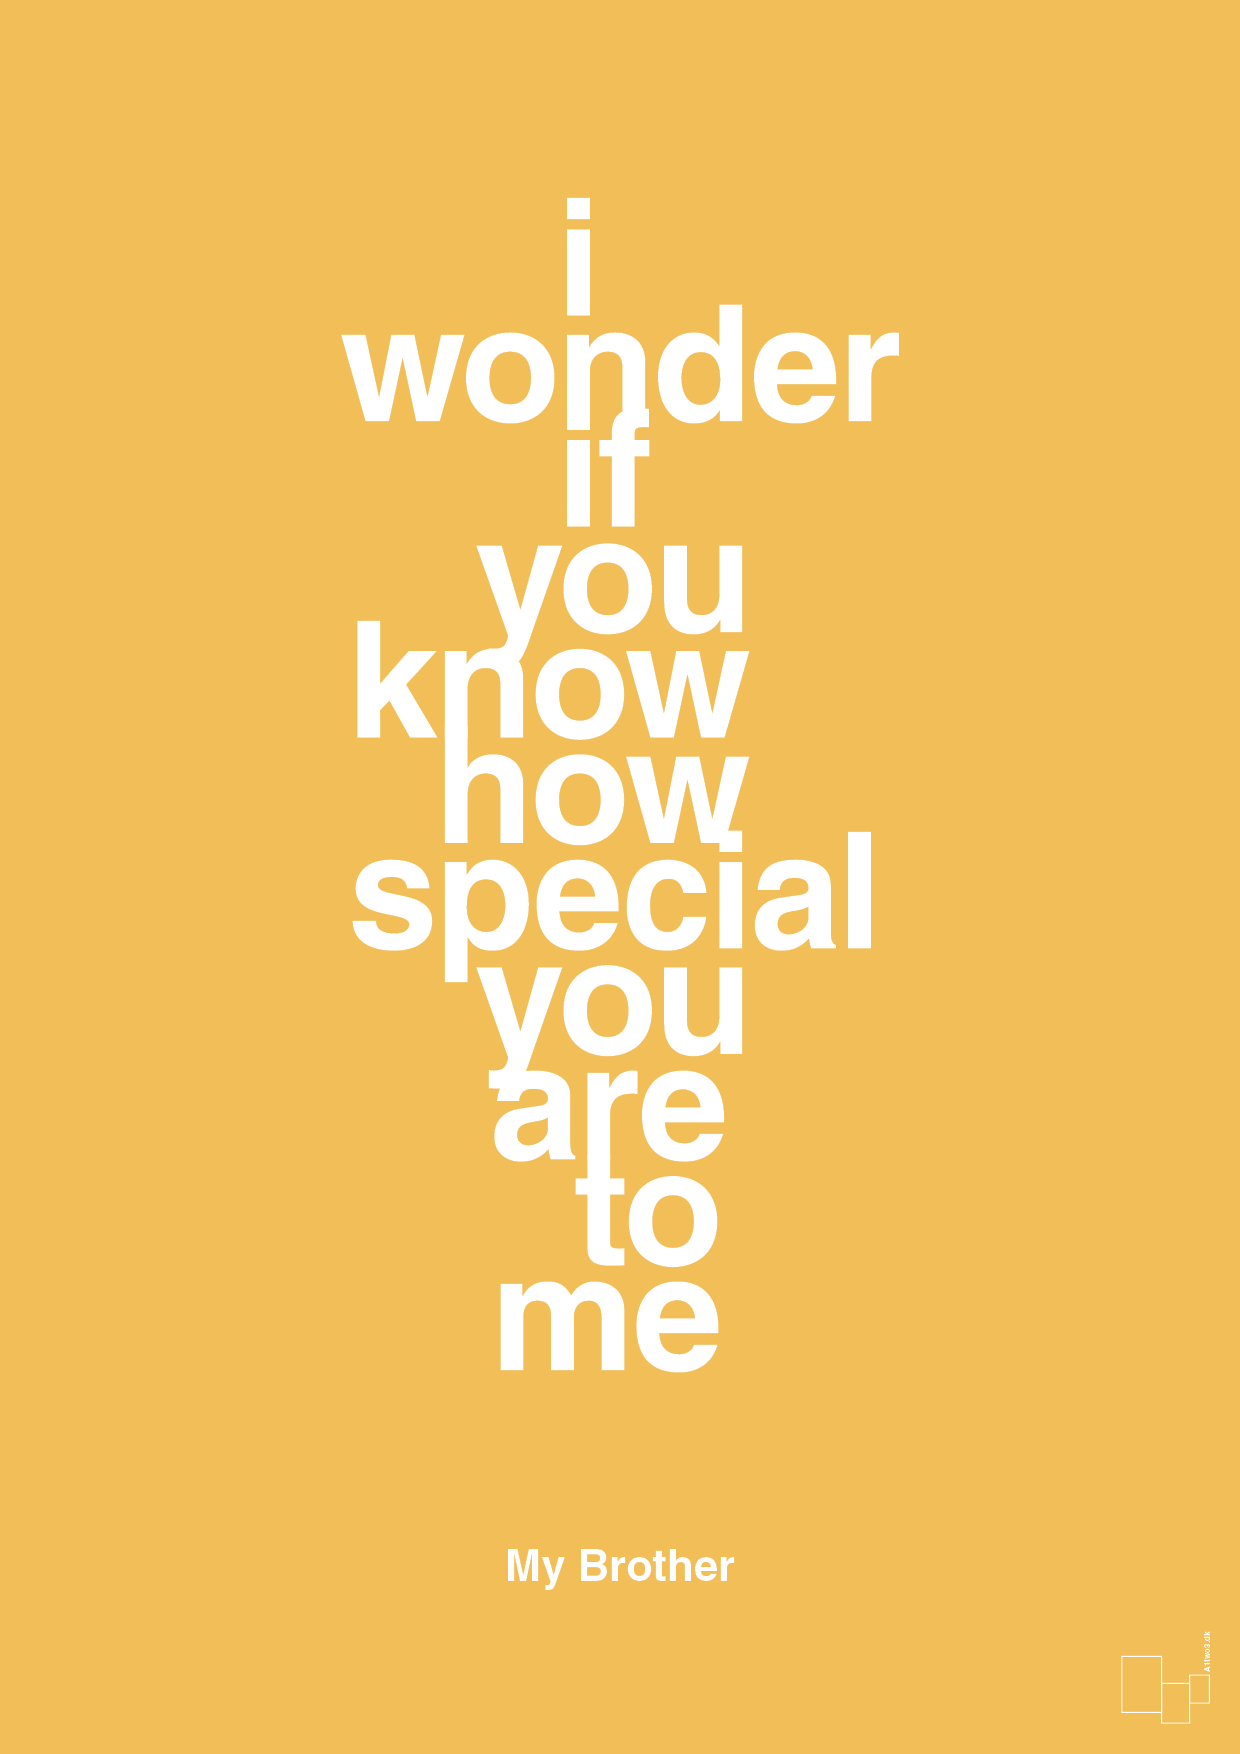 my brother - i wonder if you know how special you are to me - Plakat med Citater i Honeycomb